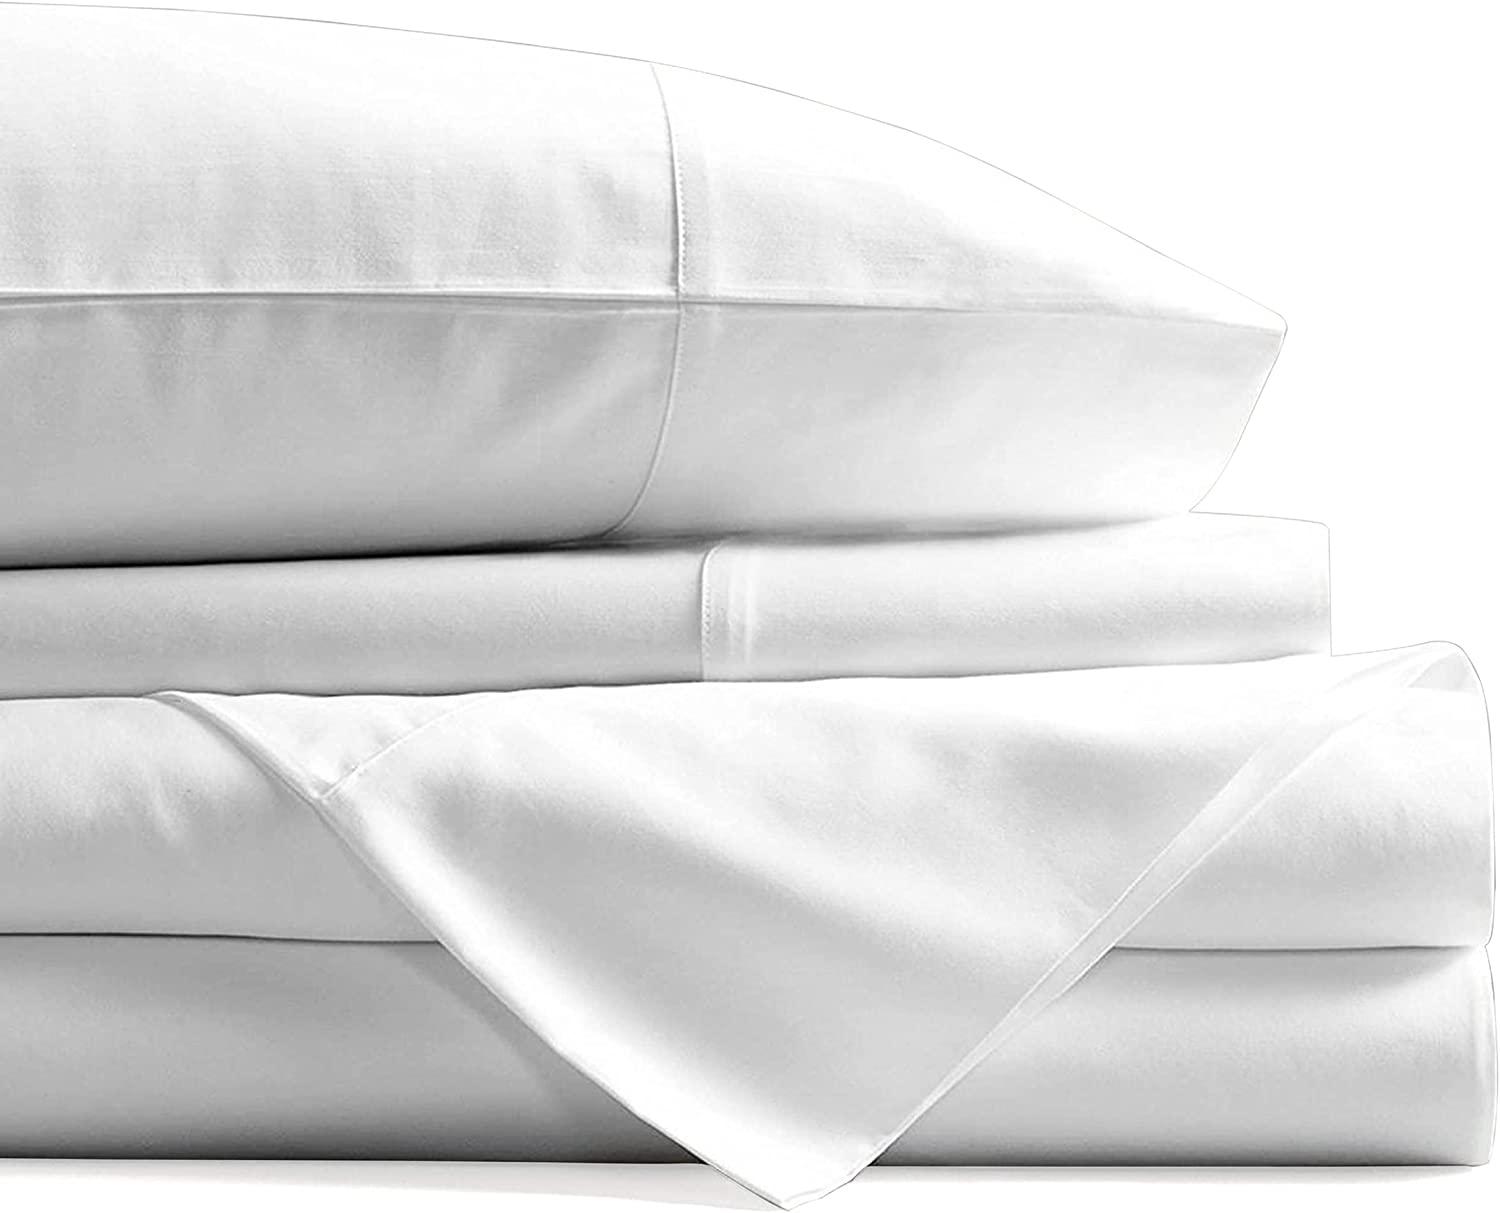 Pure Egyptian King Size Cotton Bed Sheets Set for $63.88 Shipped